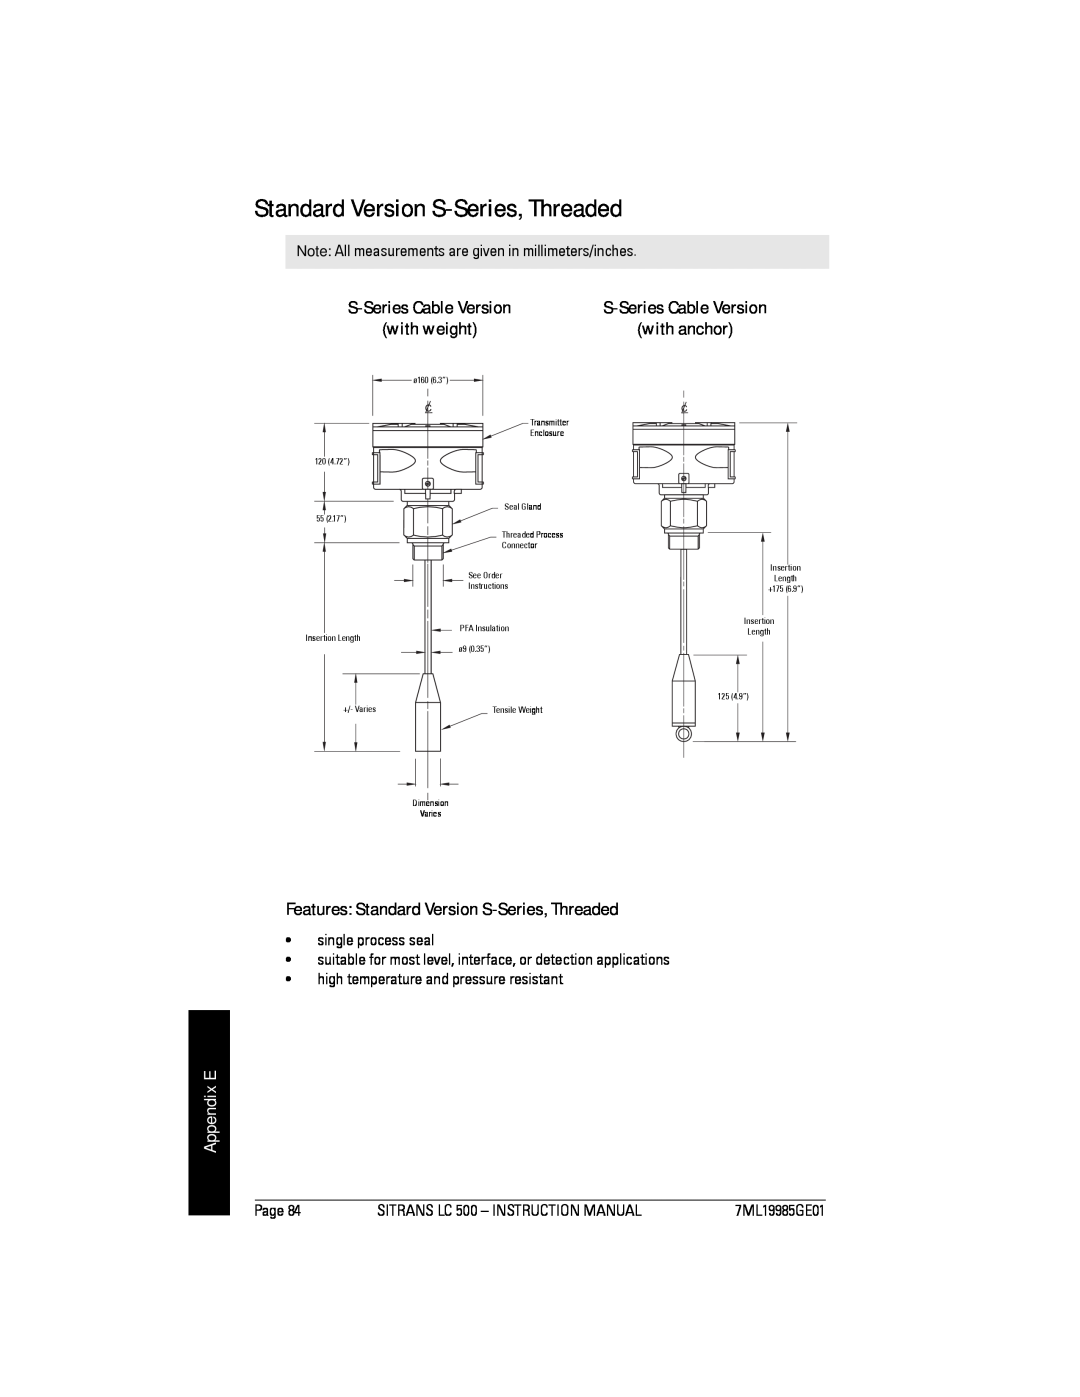 Siemens LC 500, Sitrans instruction manual Appendix E, Features Standard Version S-Series, Threaded 